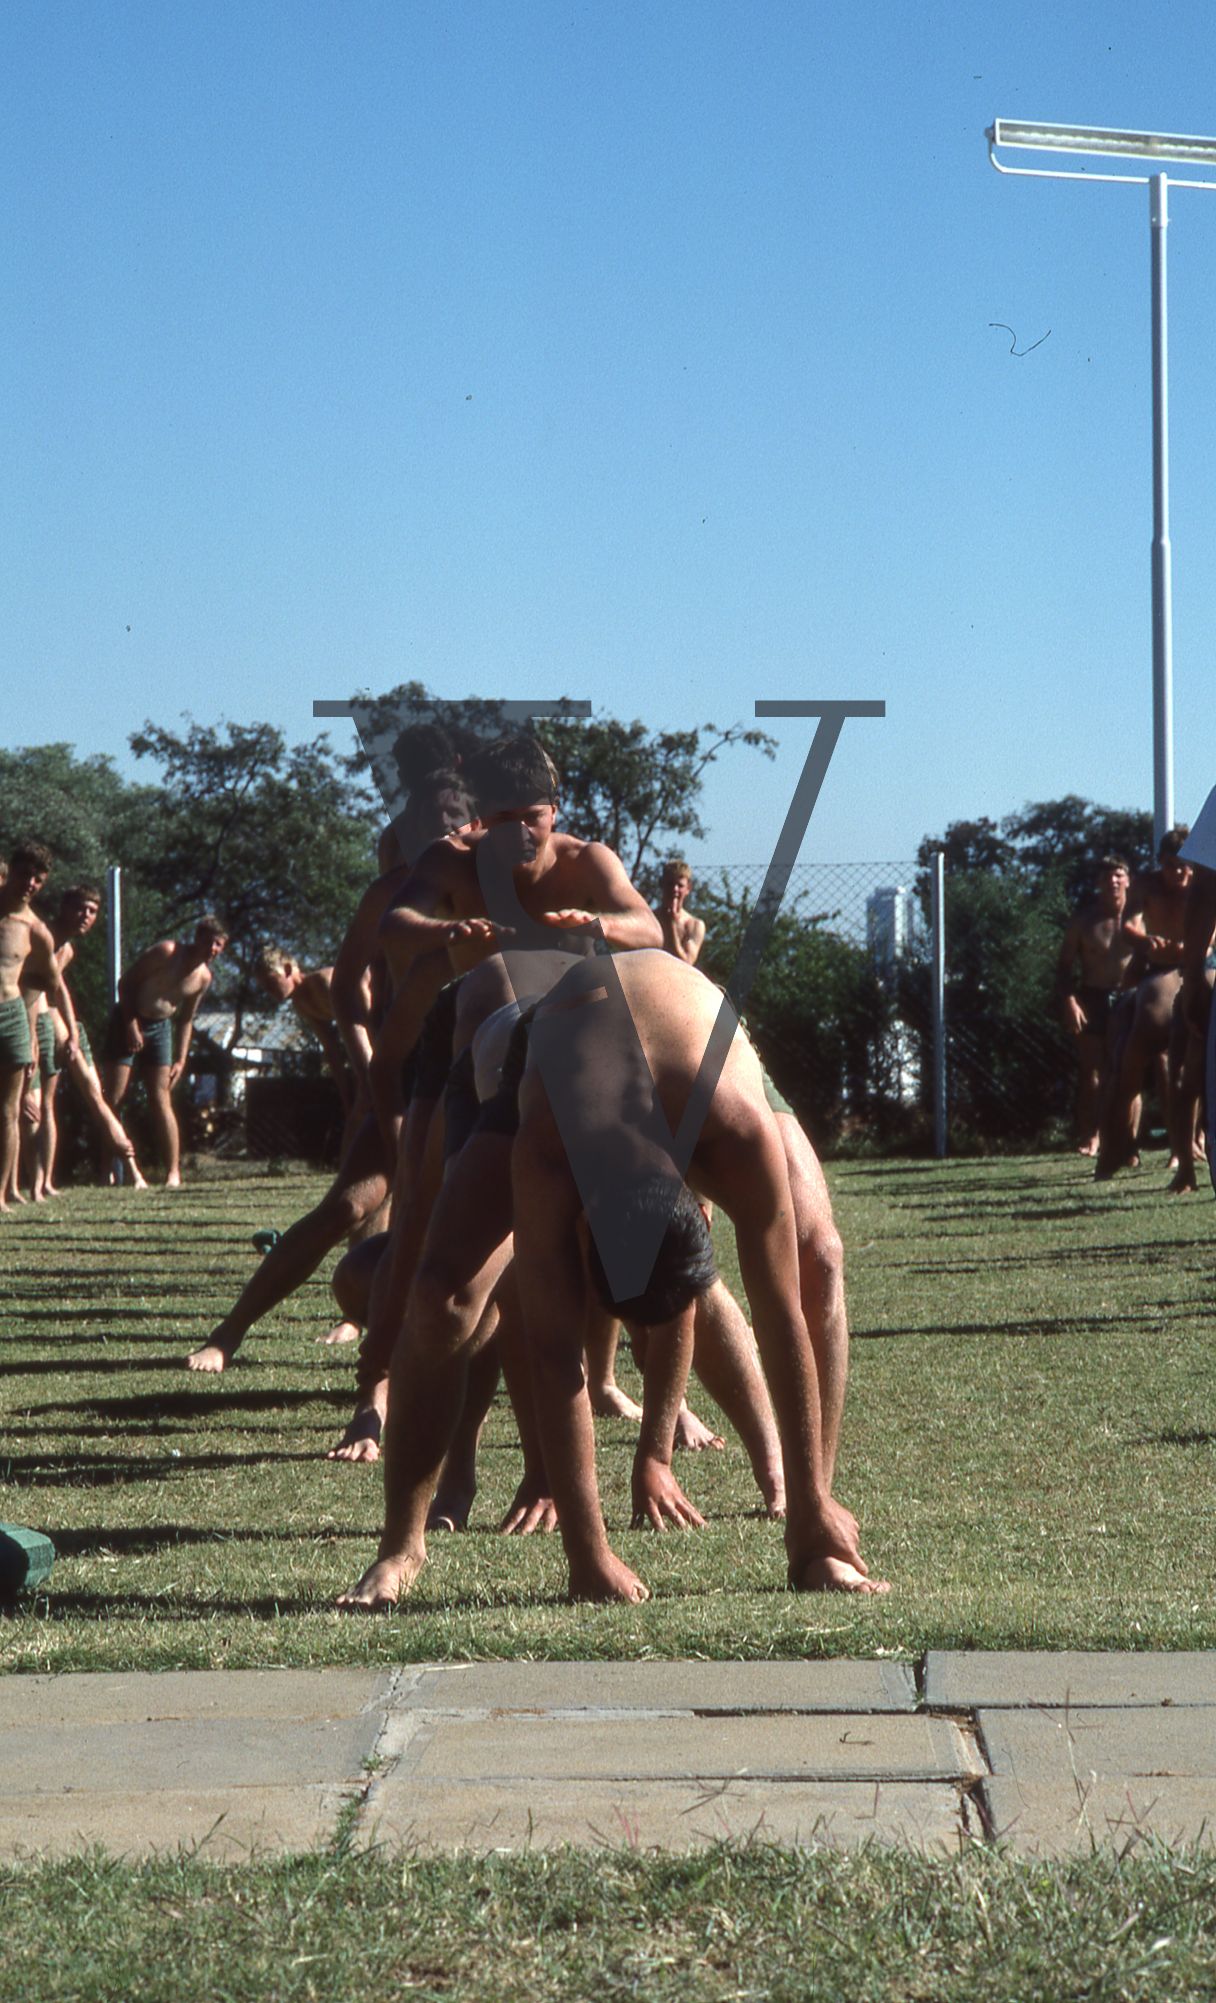 Rhodesia, Rhodesian Light Infantry, passing out ceremony, soldiers playing leapfrog.